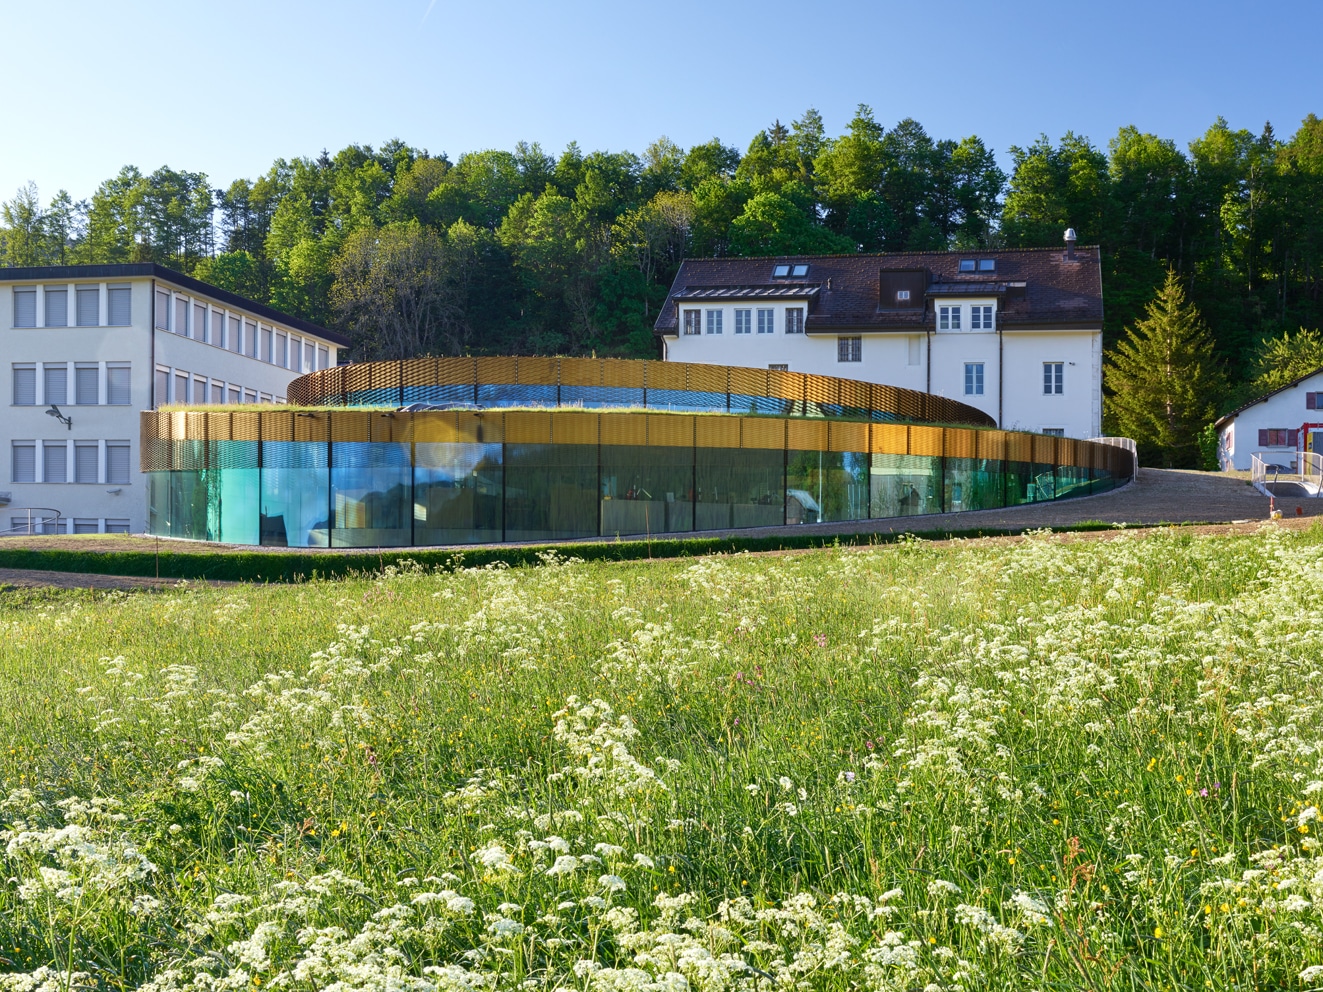 Side view of the Museum Maison des Fondateurs located in Switzerland. Building walls are clad from Nordic Brass copper.